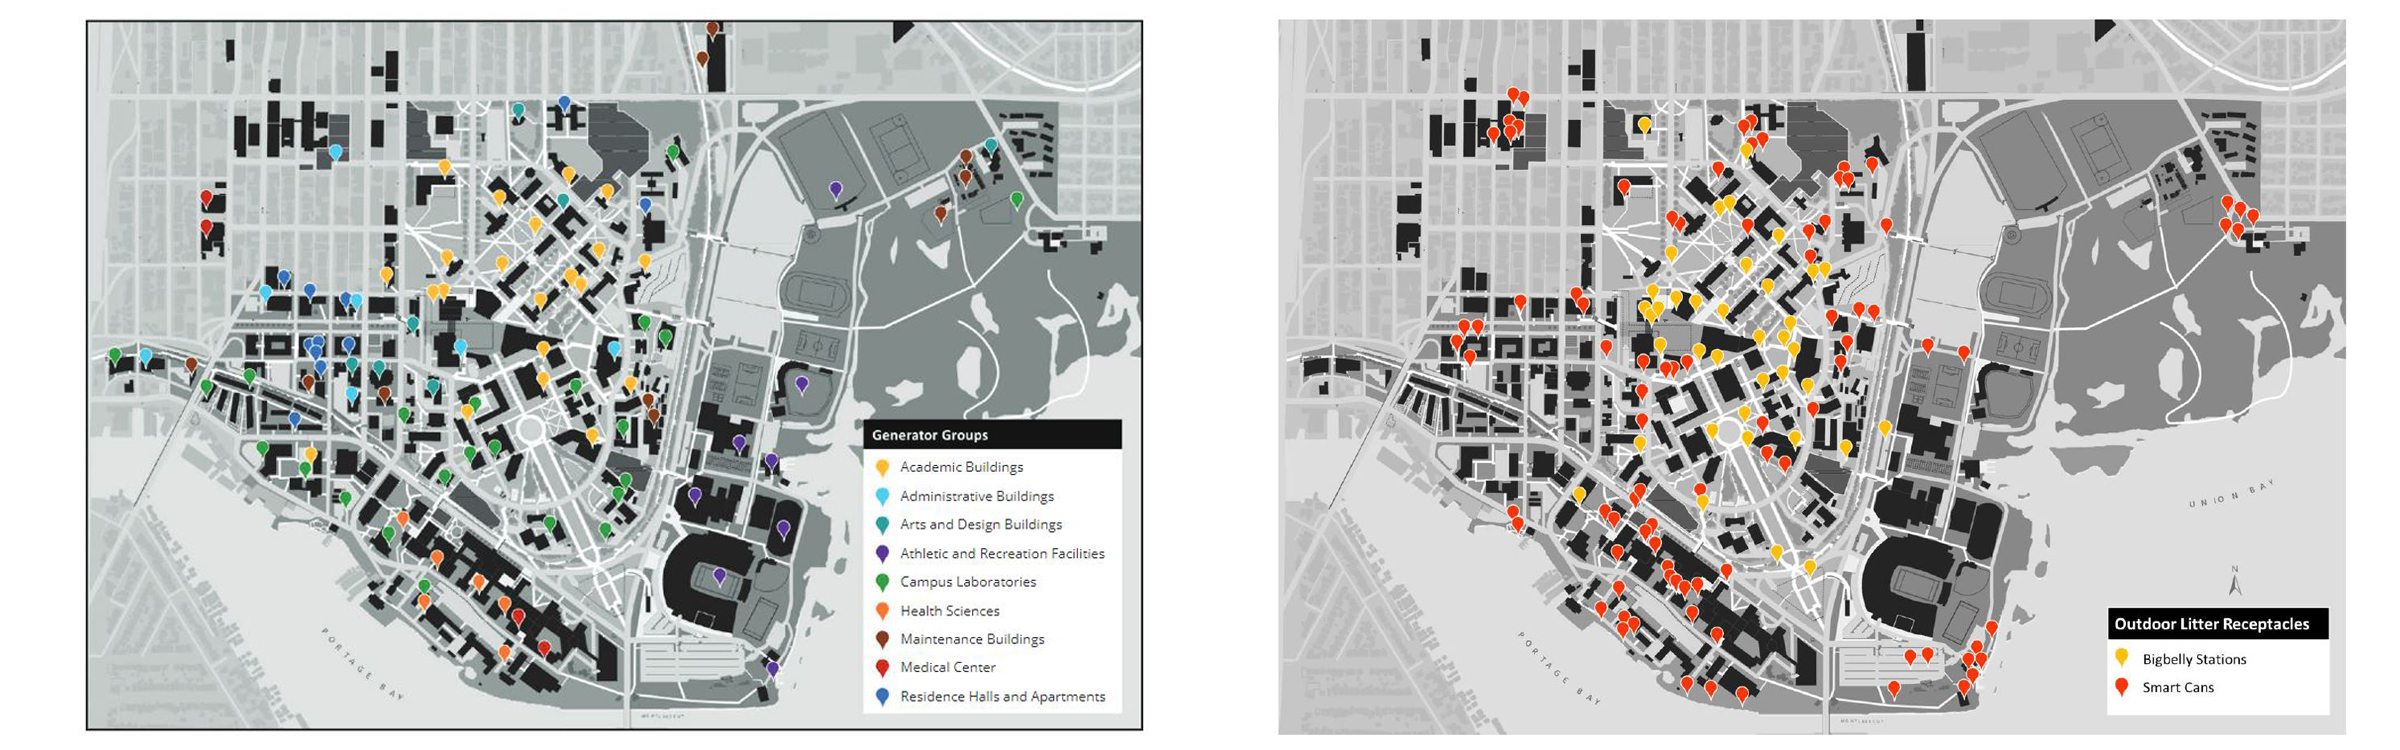 On left, map indicating what generator groups were part of the study. On right, a graph illustrates the annual tons of waste disposed of on UW's campus.